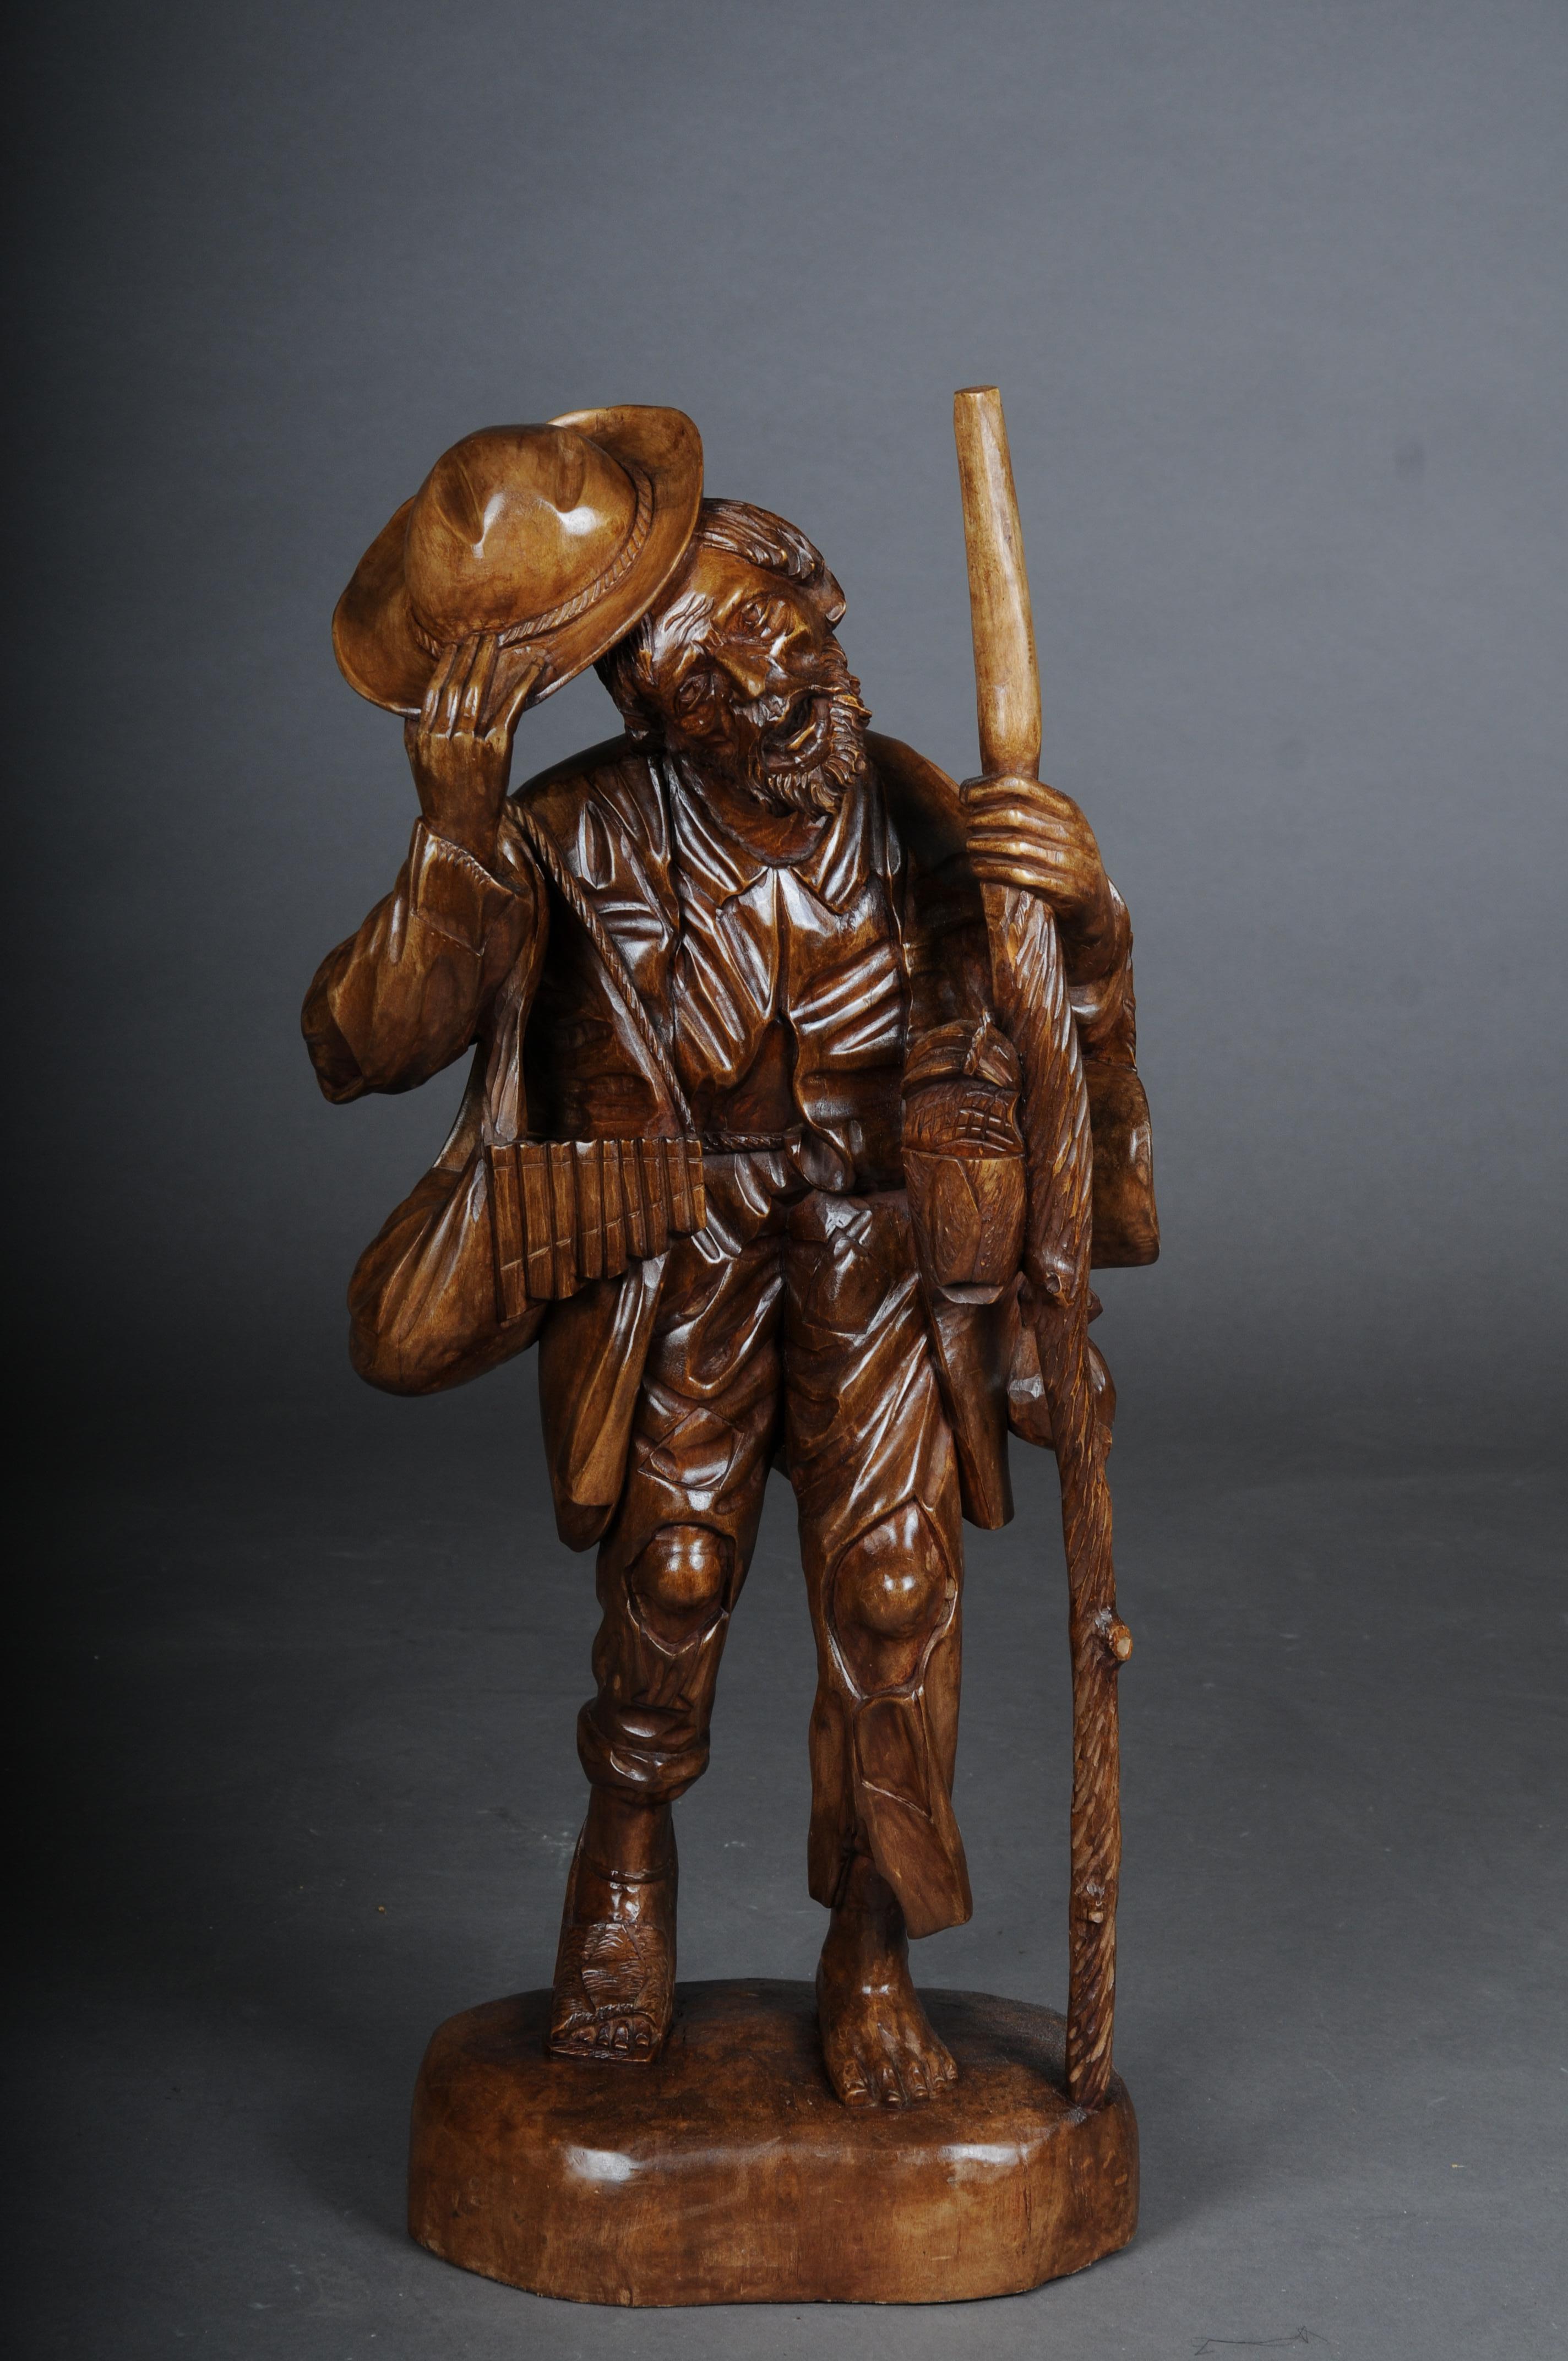 Finely carved wooden sculpture, ranger made of lime tree, southern German 20th century

Solid lime wood. Finely carved figure depicting an old ranger saluting with a hat and walking stick.
Southern Germany/Tyrol 20th century